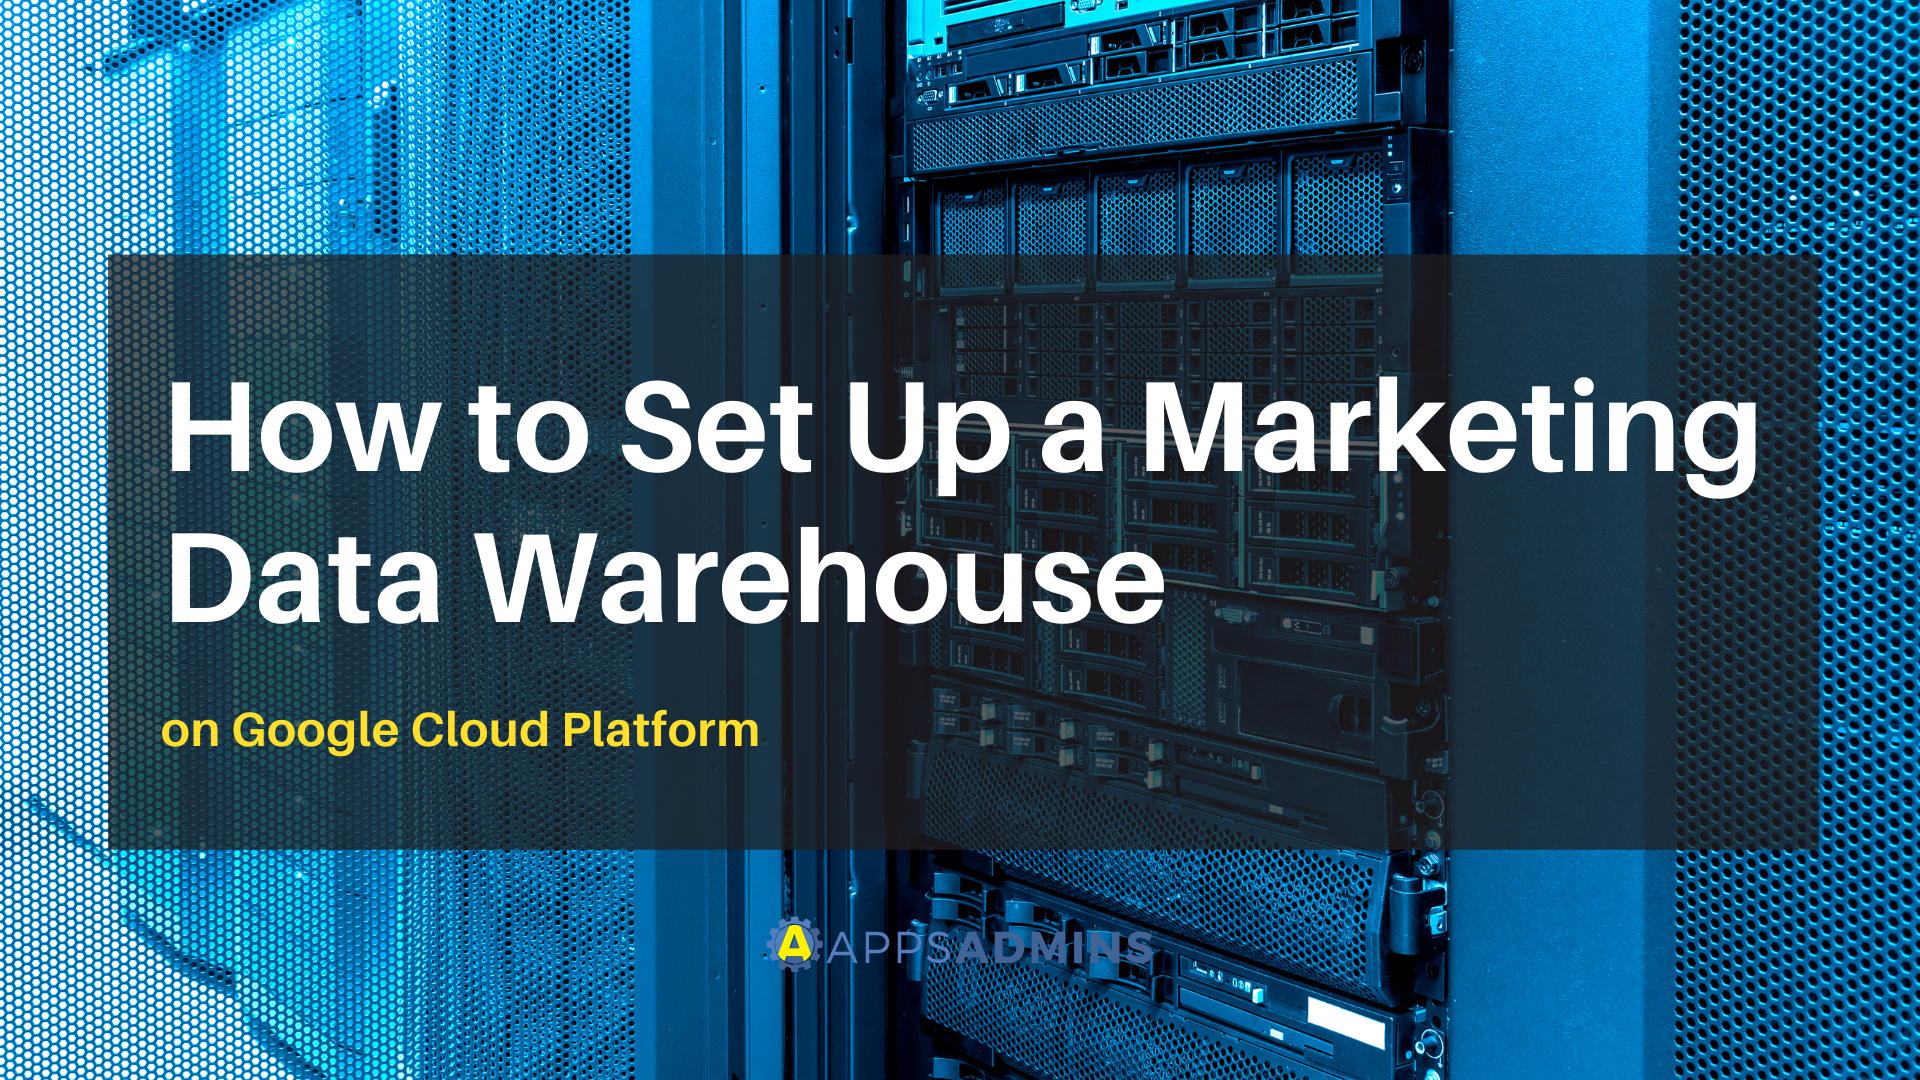 How to Set Up a Marketing Data Warehouse on the Google Cloud Platform